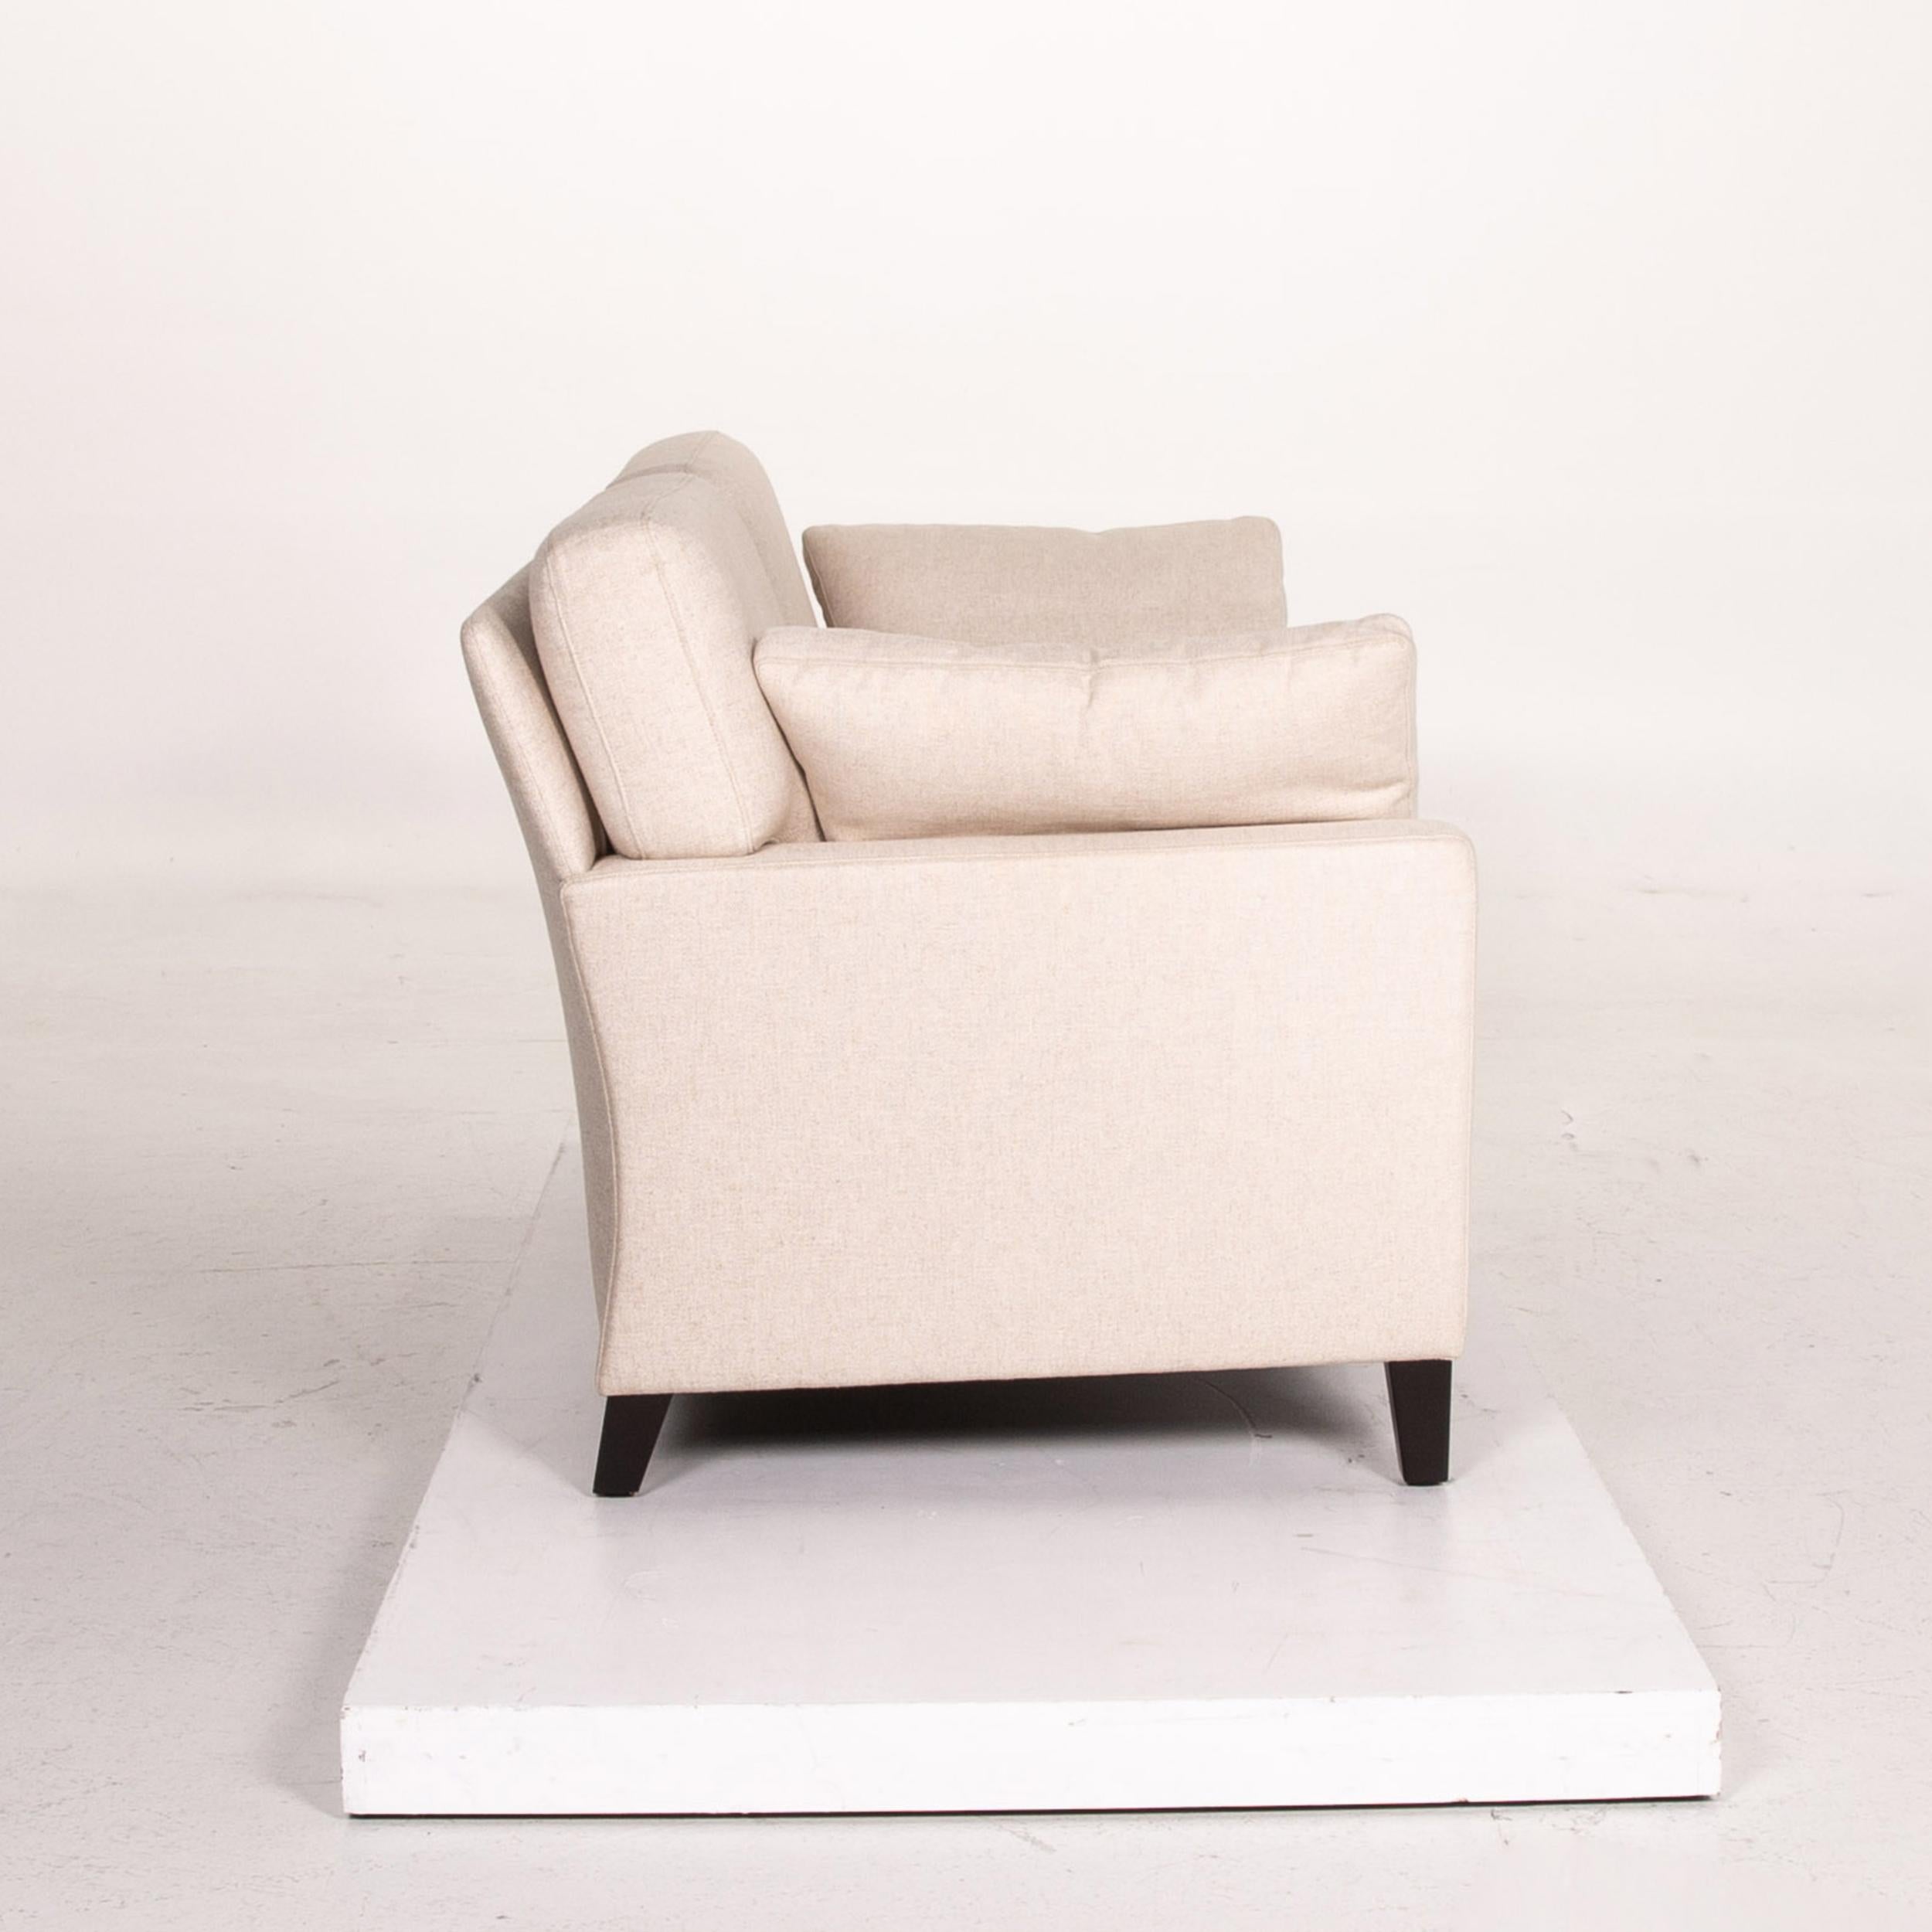 Walter Knoll Henry Fabric Sofa Cream Two-Seat Couch 3